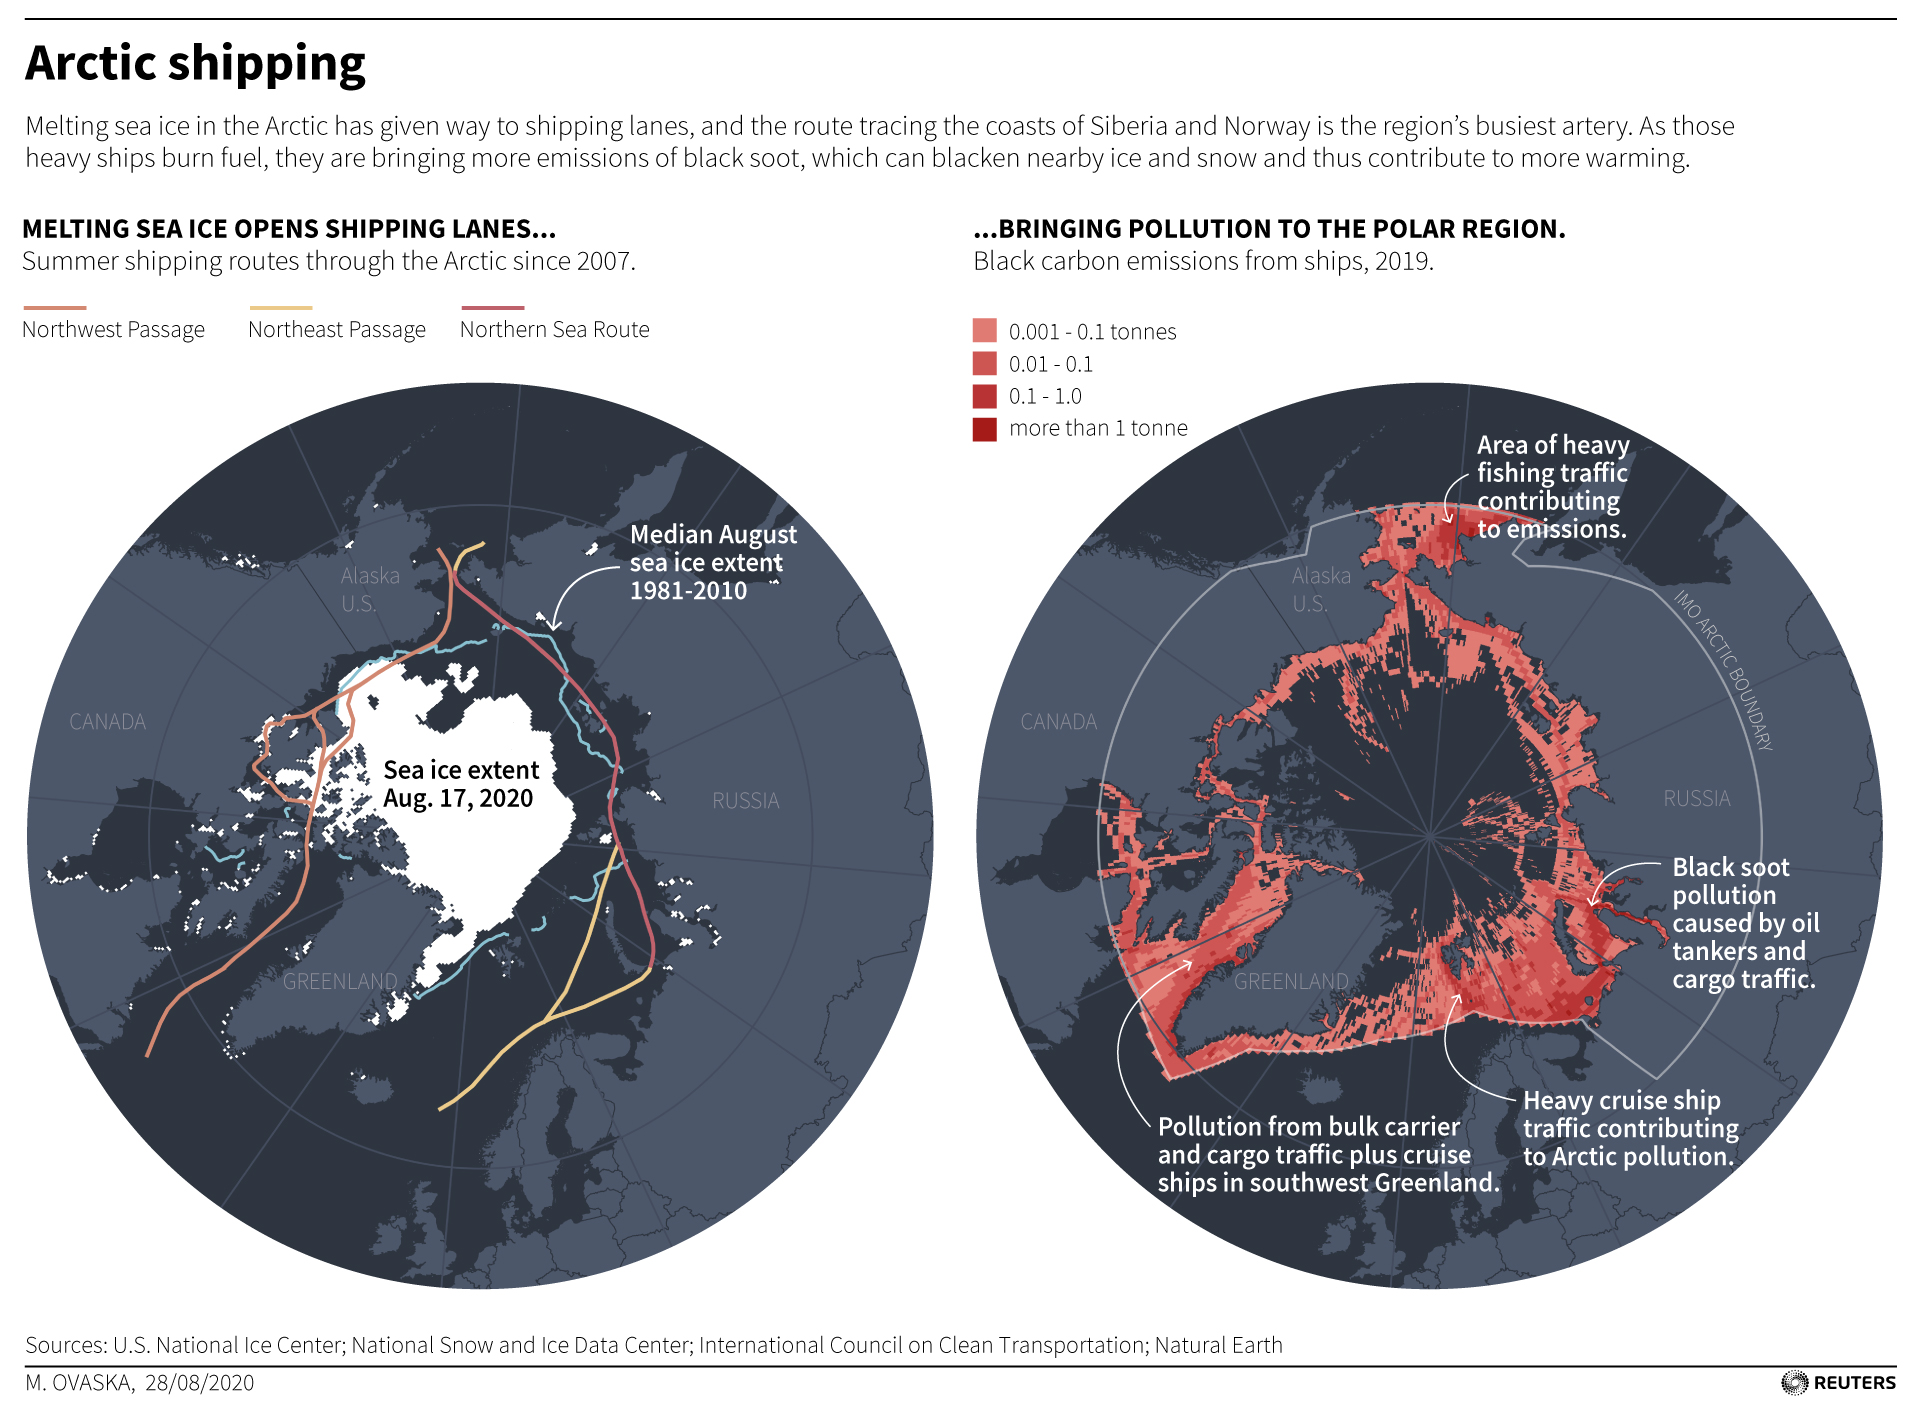 Arctic shipping lanes mapped with current sea ice extent, and the pollution caused by ship traffic in 2019